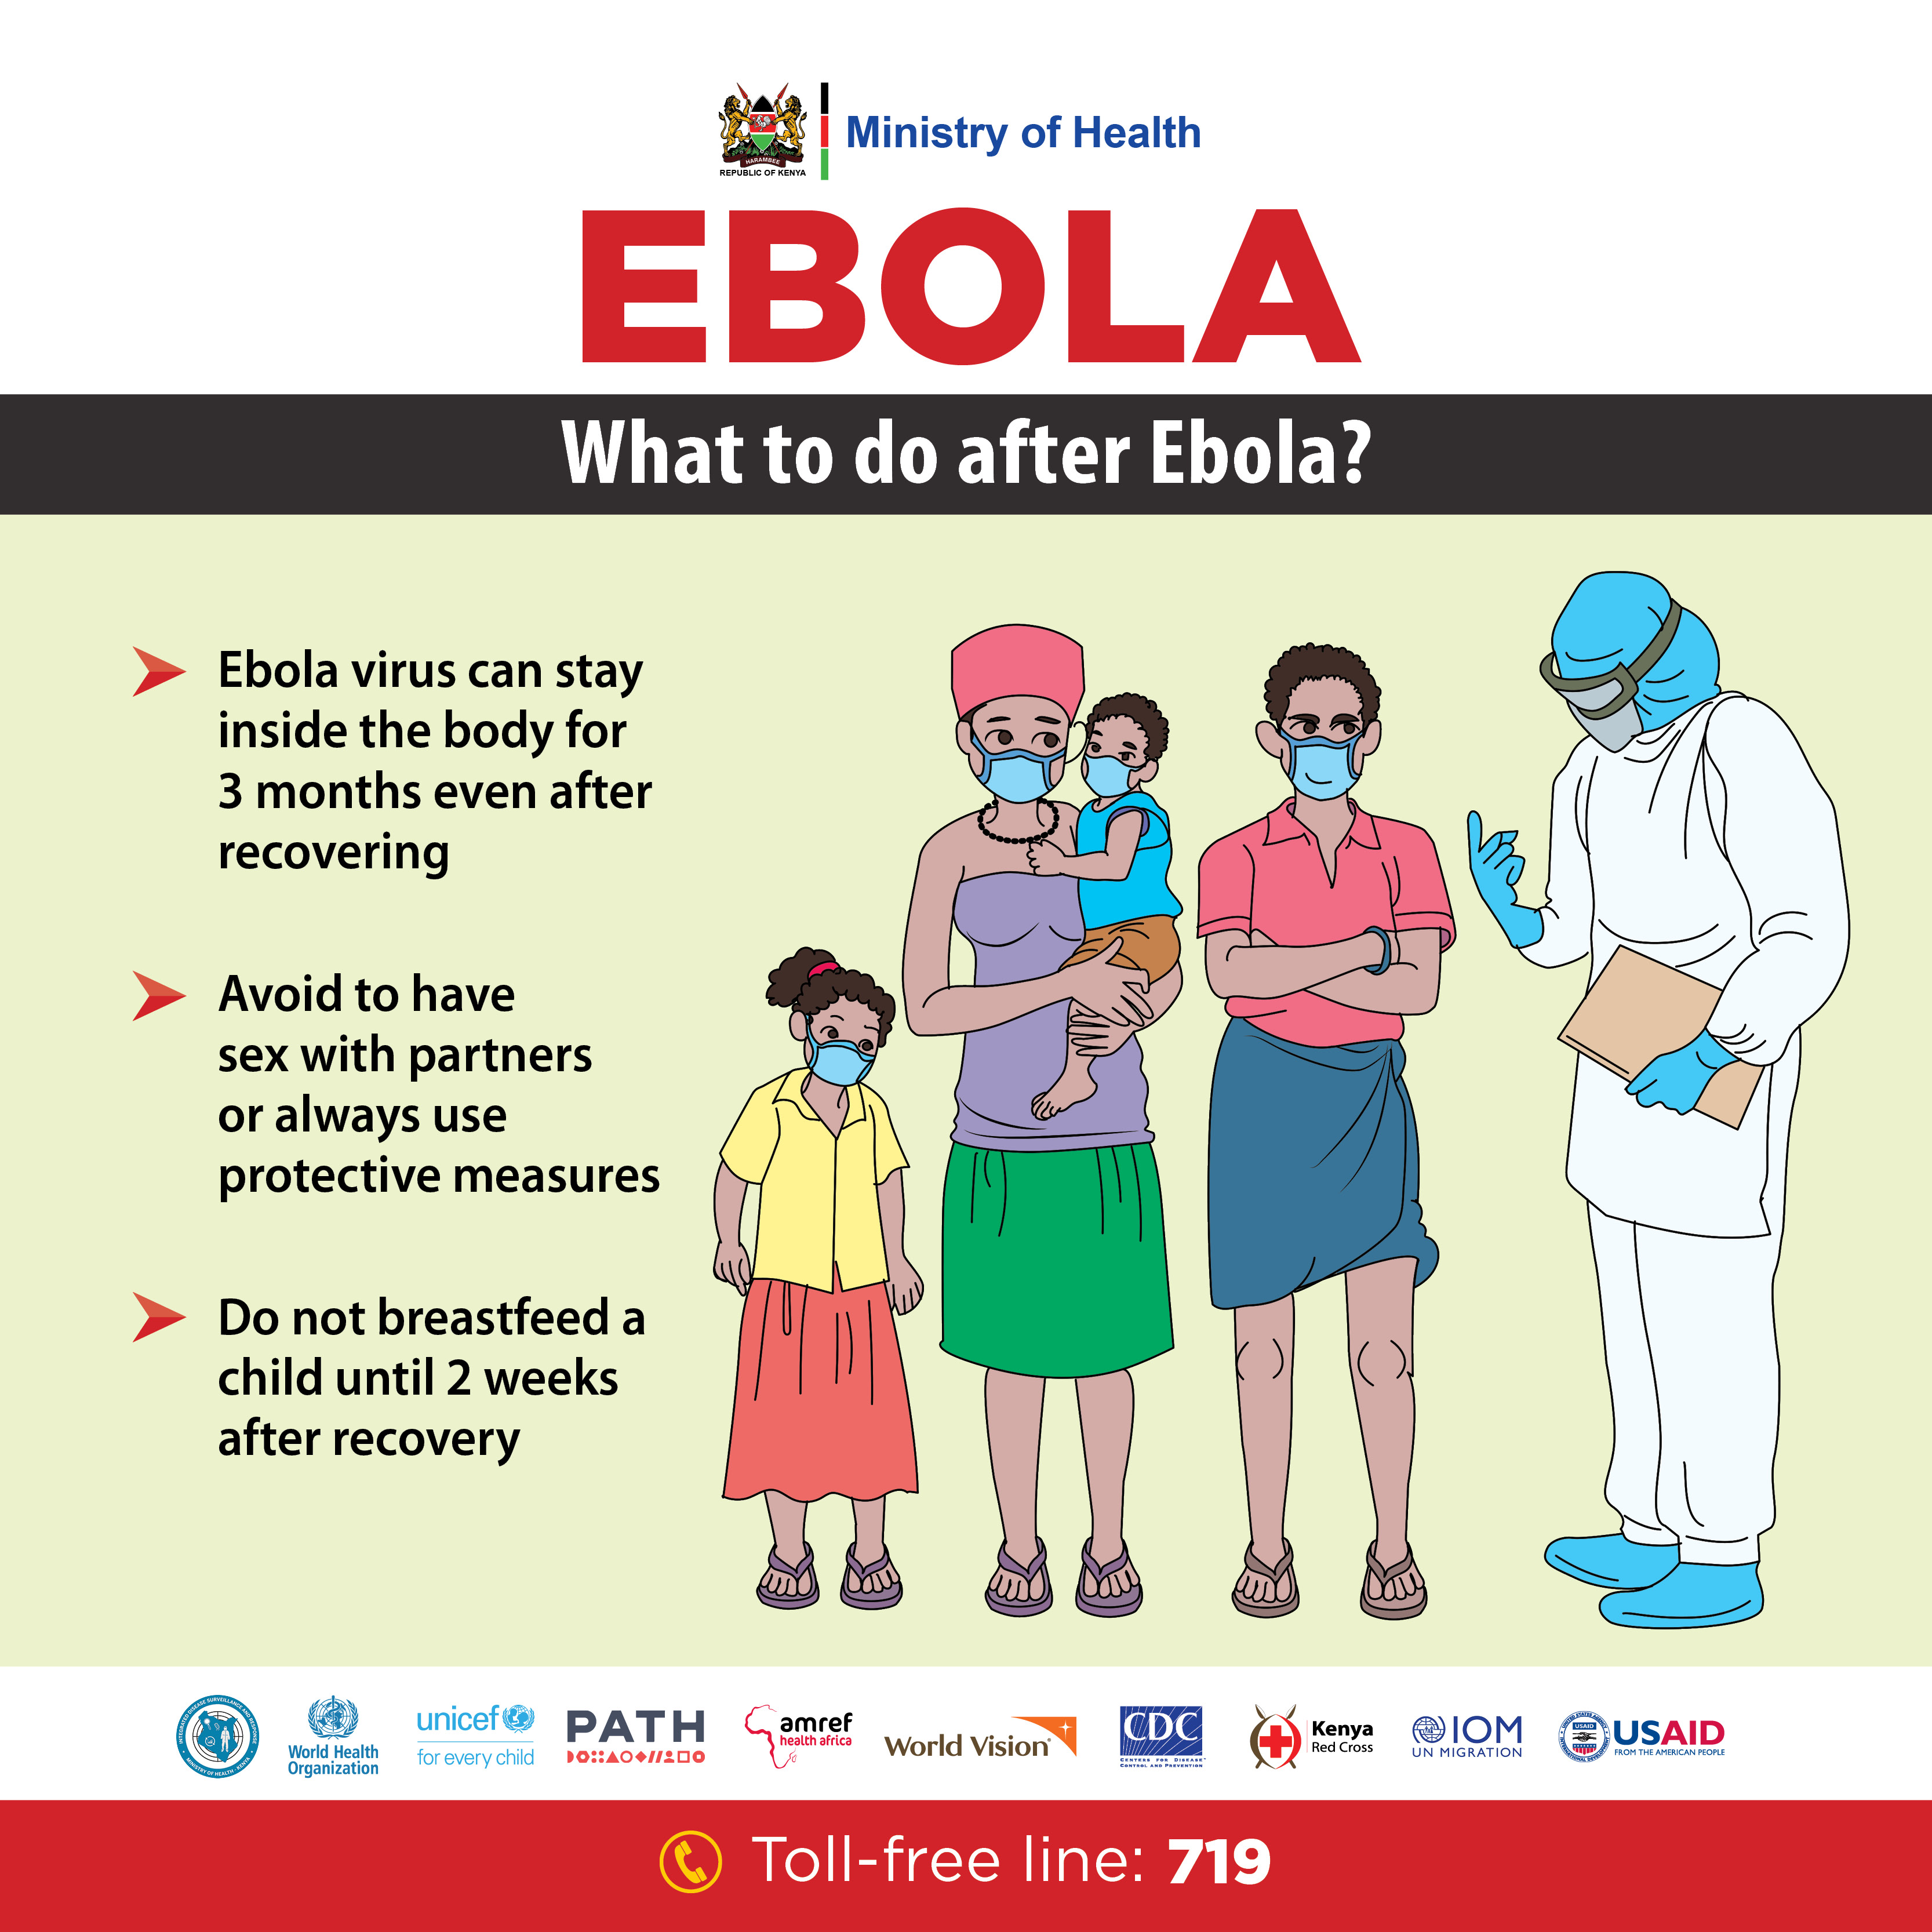 What to do after Ebola